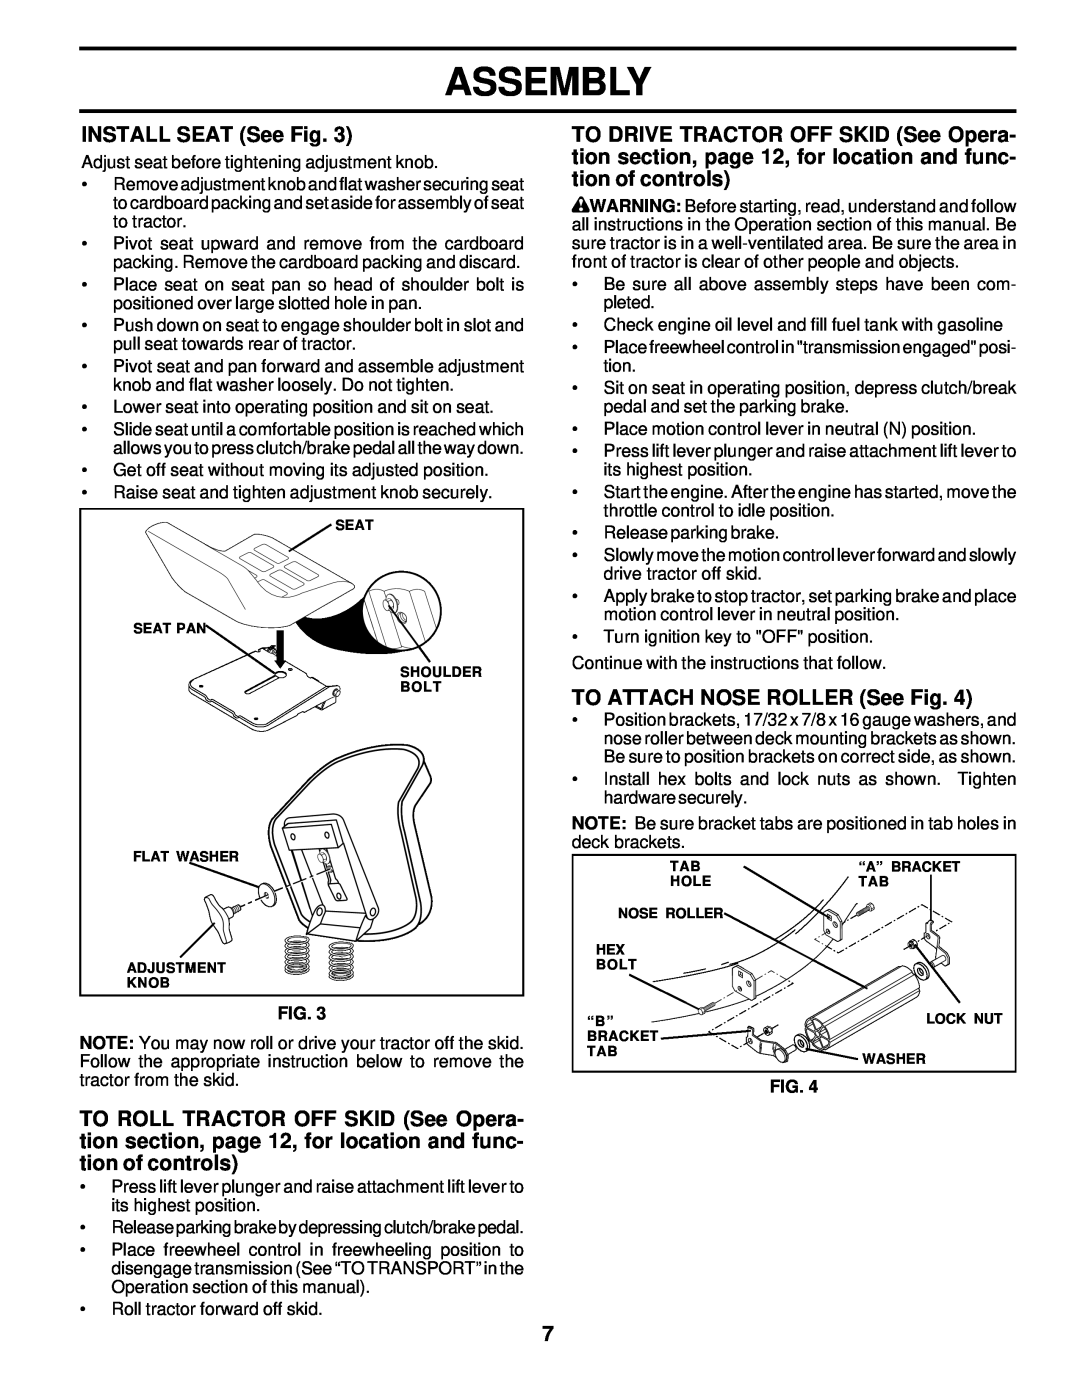 Poulan 178249 owner manual INSTALL SEAT See Fig, TO ATTACH NOSE ROLLER See Fig, Assembly 